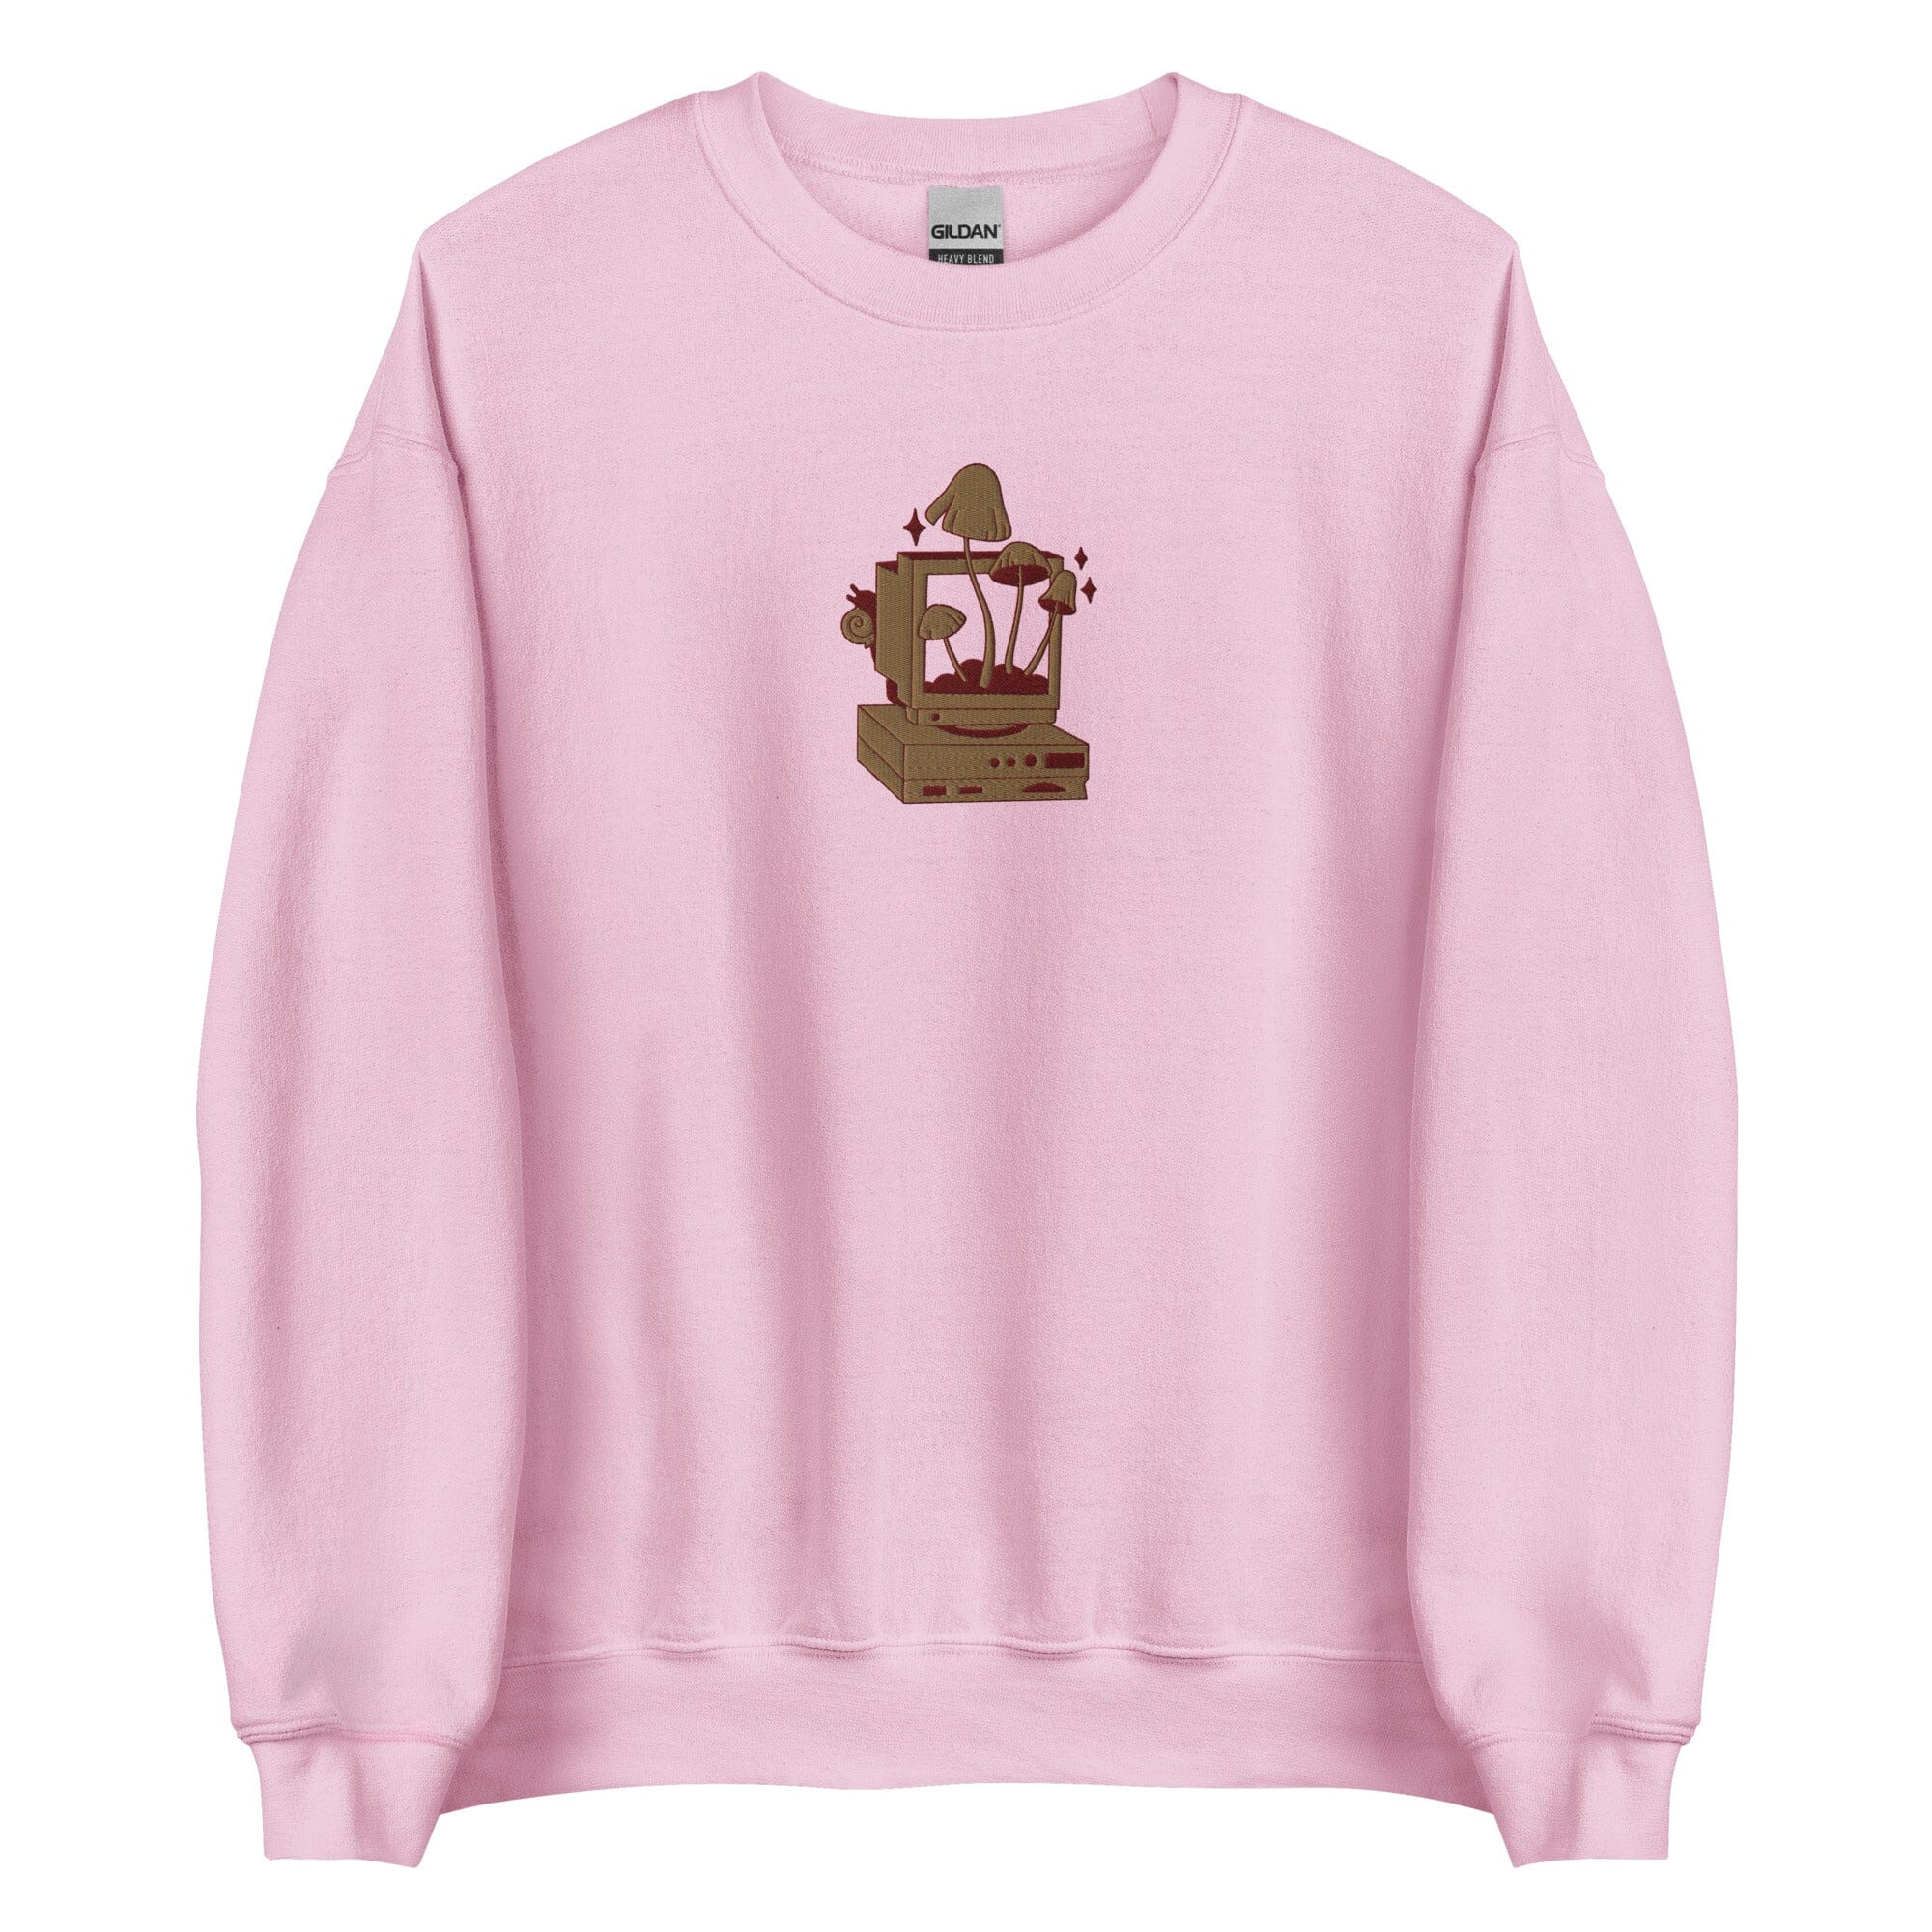 Cozy PC Gaming | Embroidered Unisex Sweatshirt | Cozy Gamer Threads & Thistles Inventory Light Pink S 